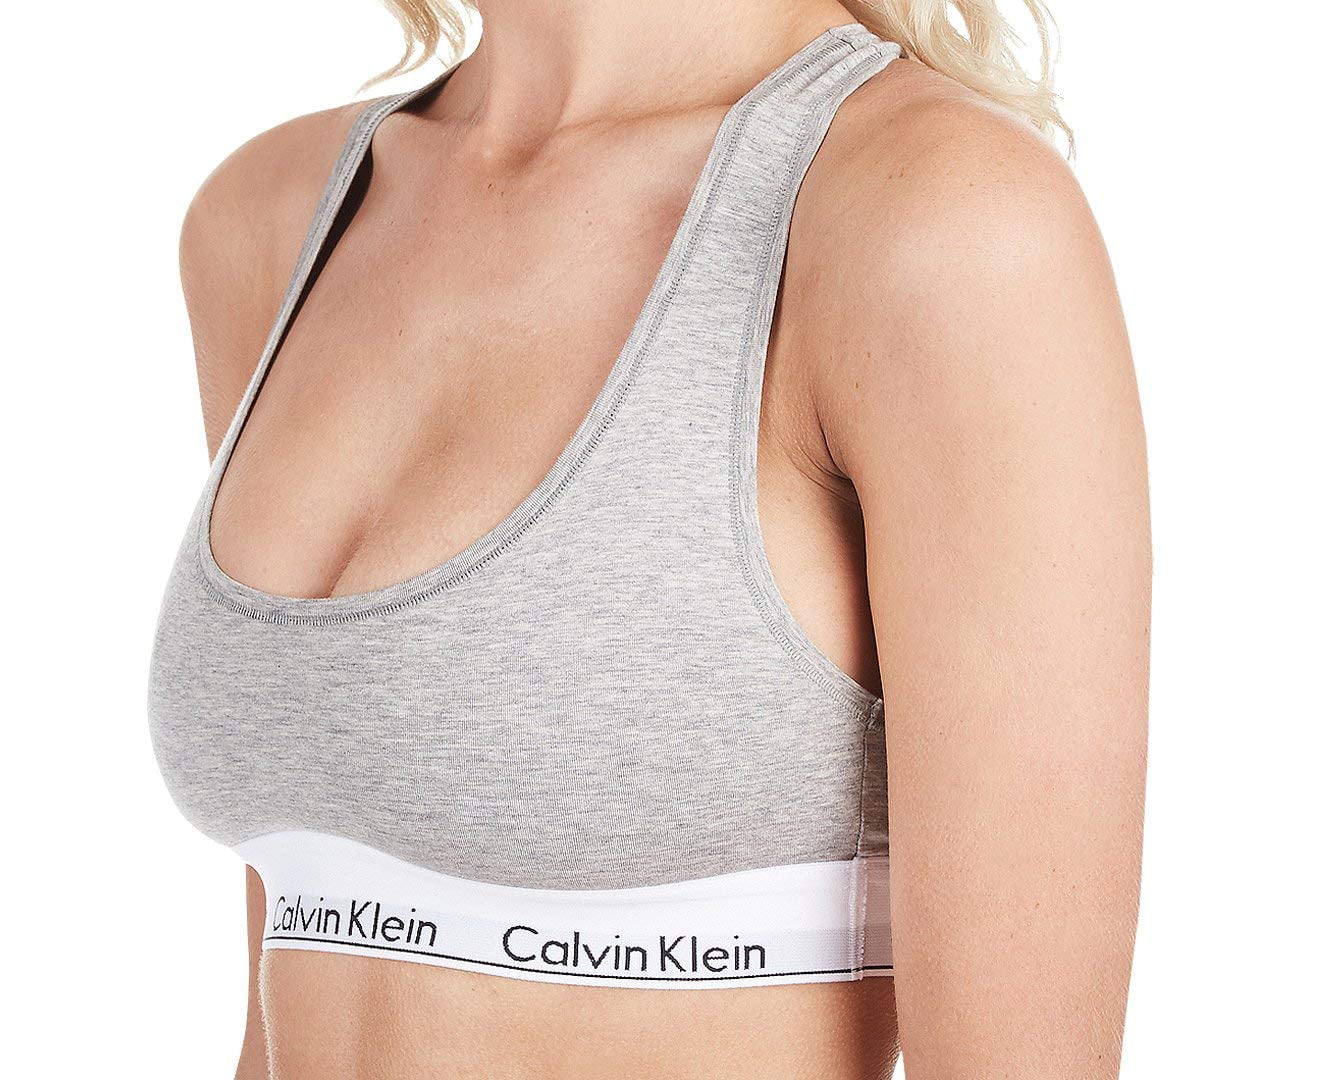 Calvin Klein Women's This is Love Lightly Lined Triangle Bra, Aqua